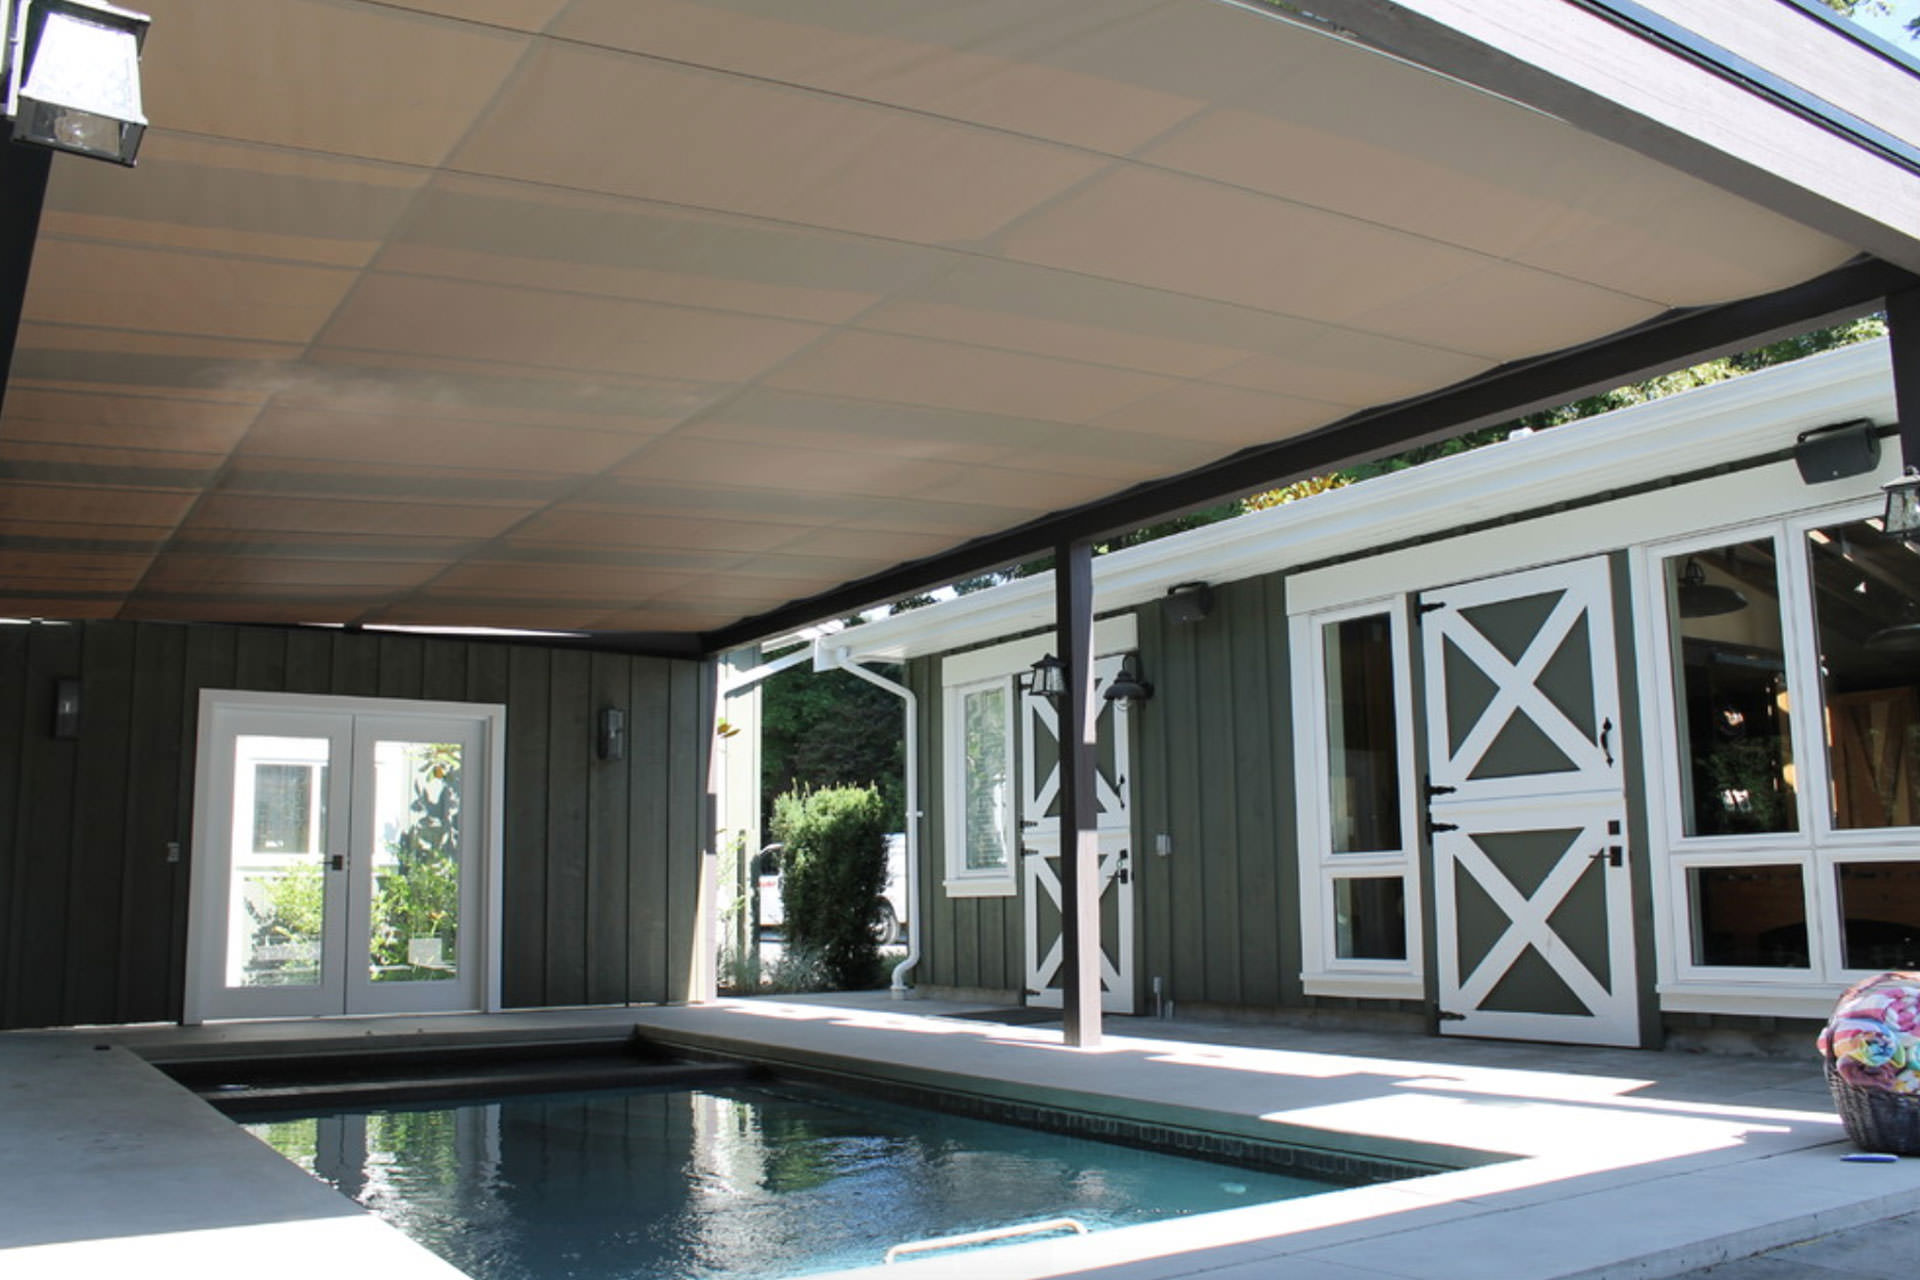 Pool Shade Ideas Retractable Canopies